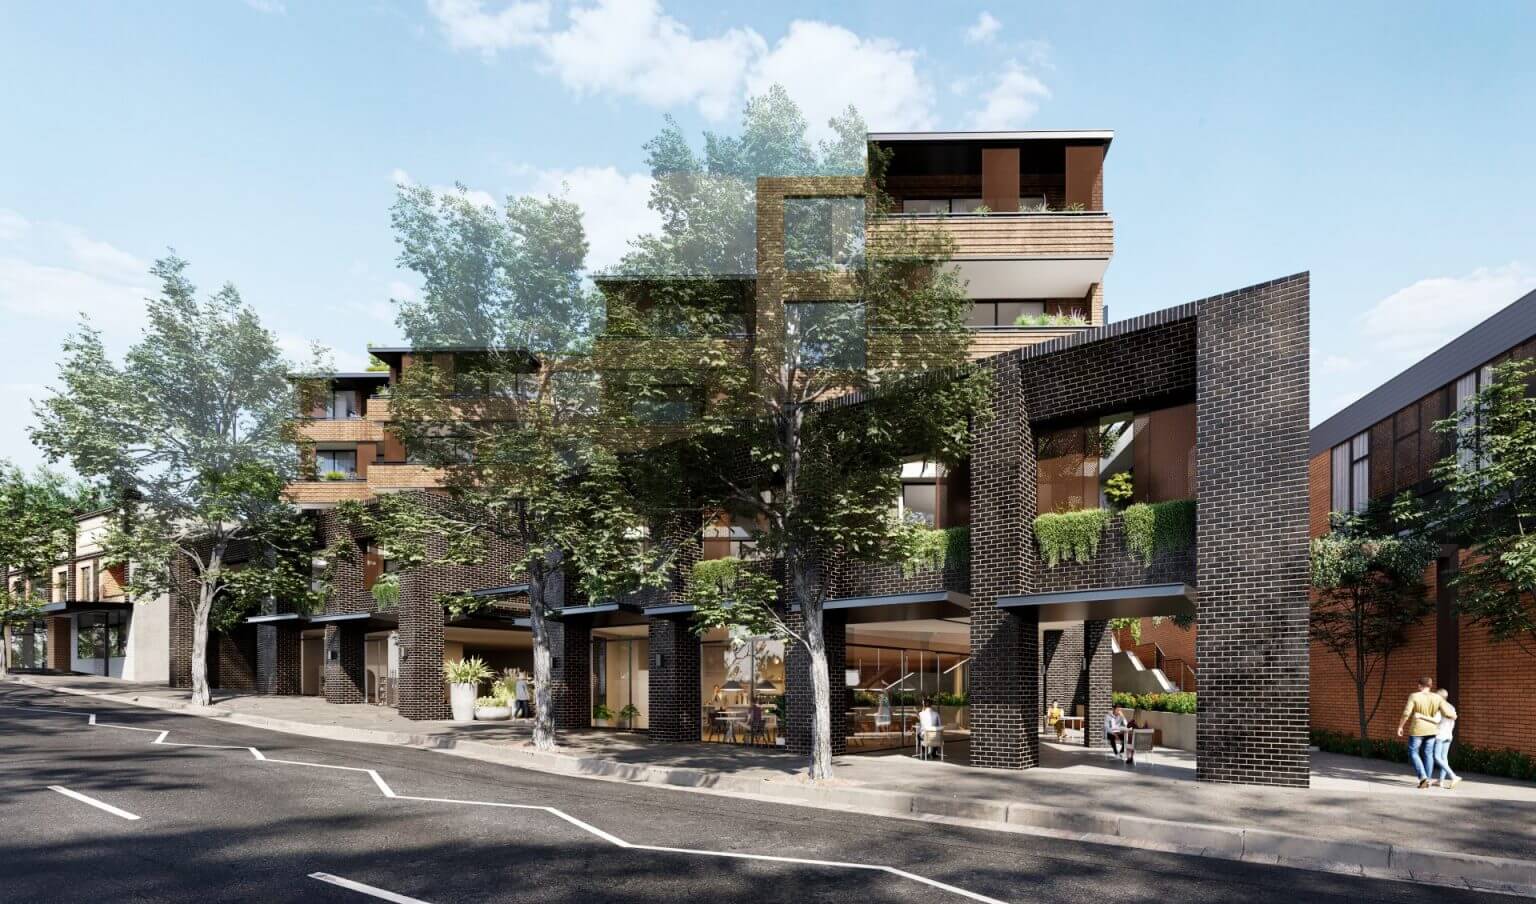 Exterior View of Beecroft Residential Development by HYG